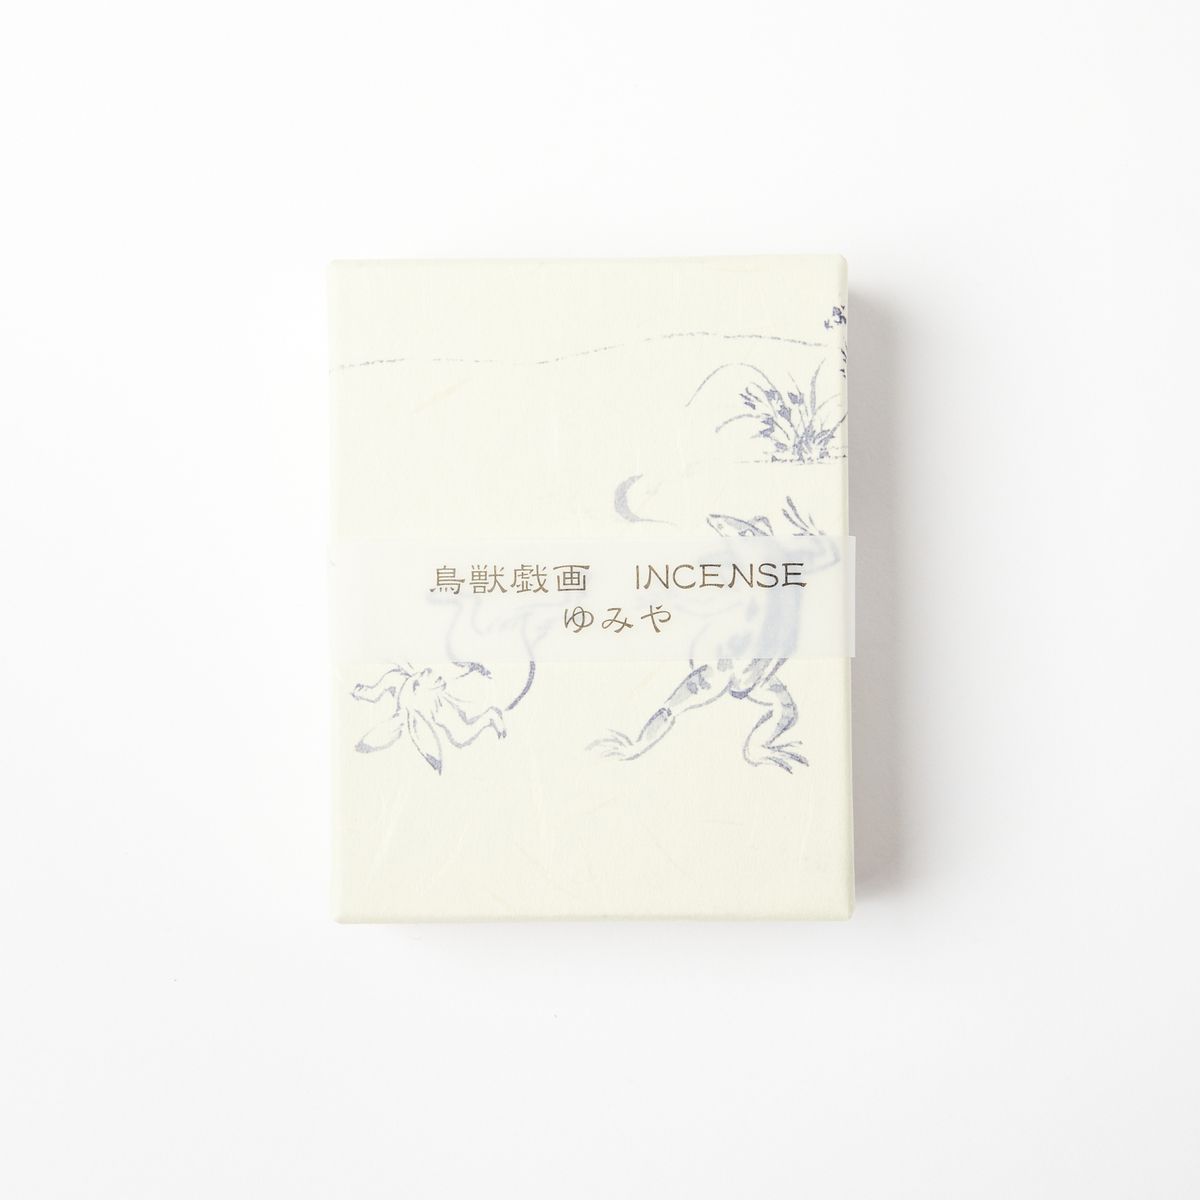 A cream box with a transparent paper band with Japanese writing and the word "Incense". The box also has soft blue sparse illustrations of greenery and animals.